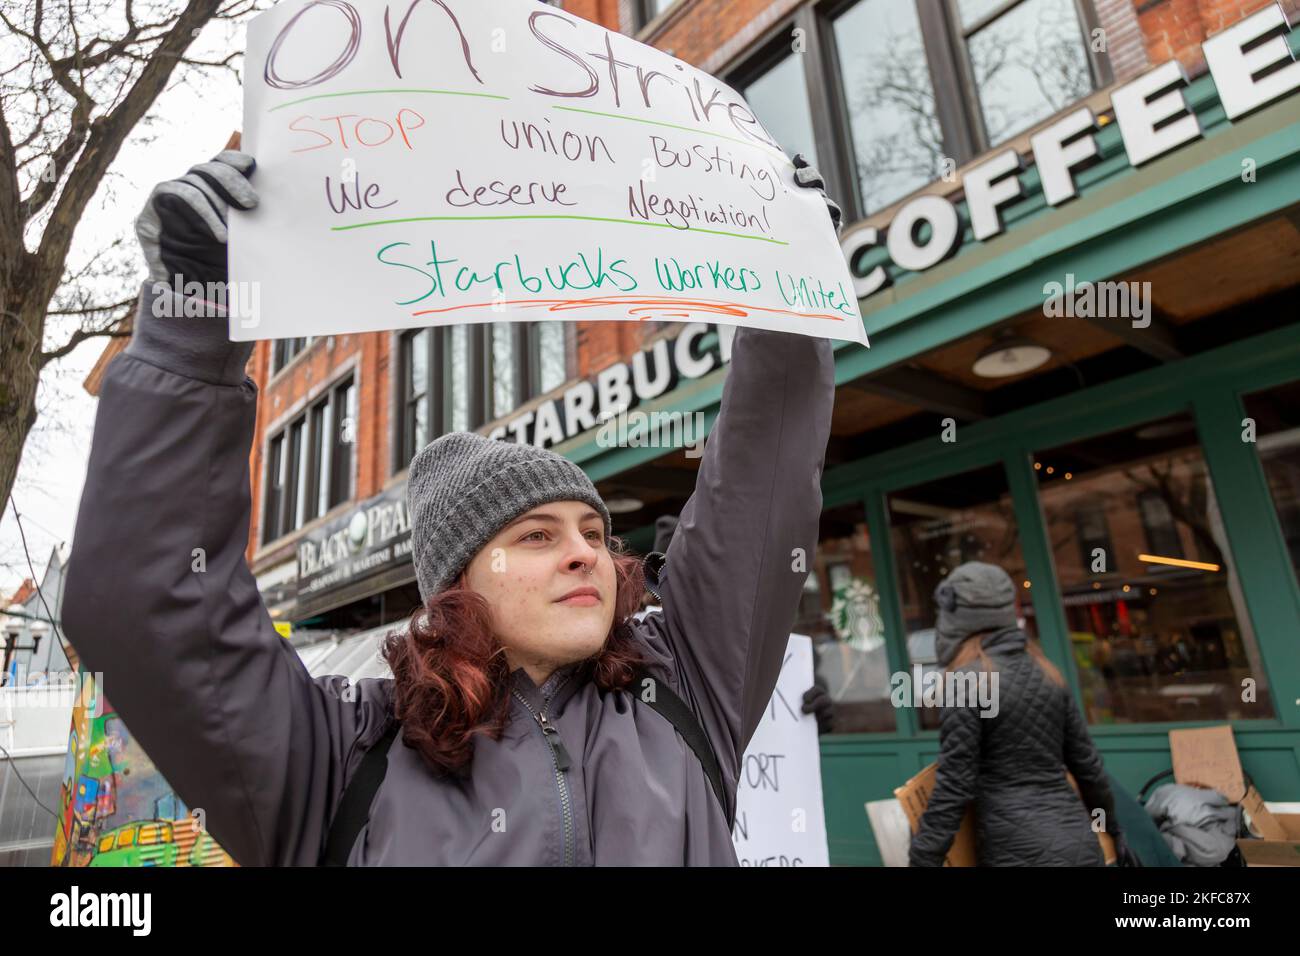 Ann Arbor, Michigan, USA. 17th Nov, 2022. Starbucks workers on strike at a Starbucks Coffee shop. Workers at this store were among more than 100 stores nationwide participating in an unfair labor practice strike over inadequate staffing on the company's Red Cup Day. They are members of the Starbucks Workers United union. Credit: Jim West/Alamy Live News Stock Photo